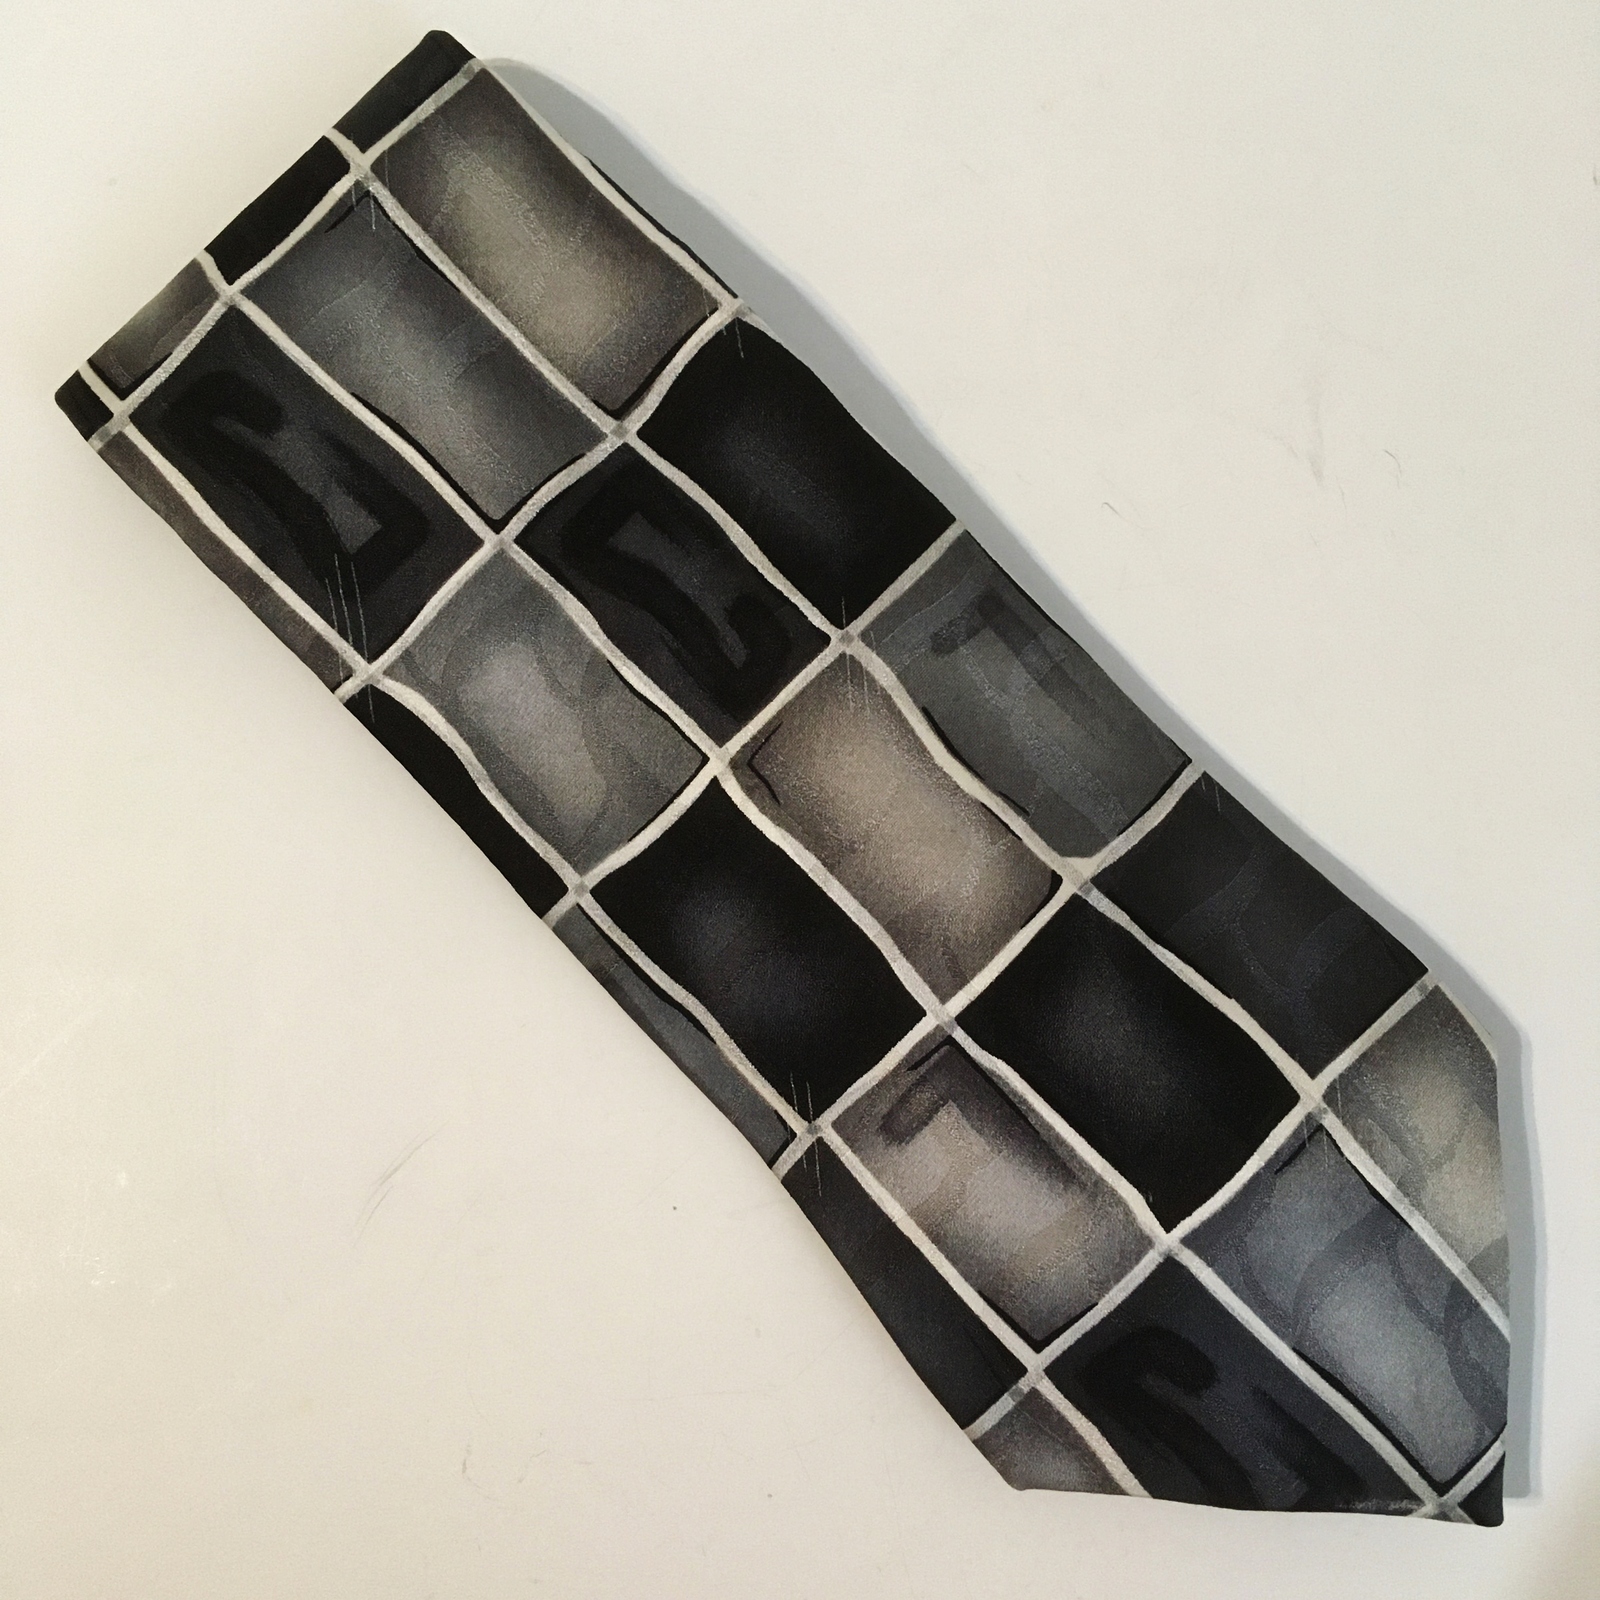 Primary image for Arrow Neck Tie 100% Silk Black Gray White Geometric Abstract Pattern Mens